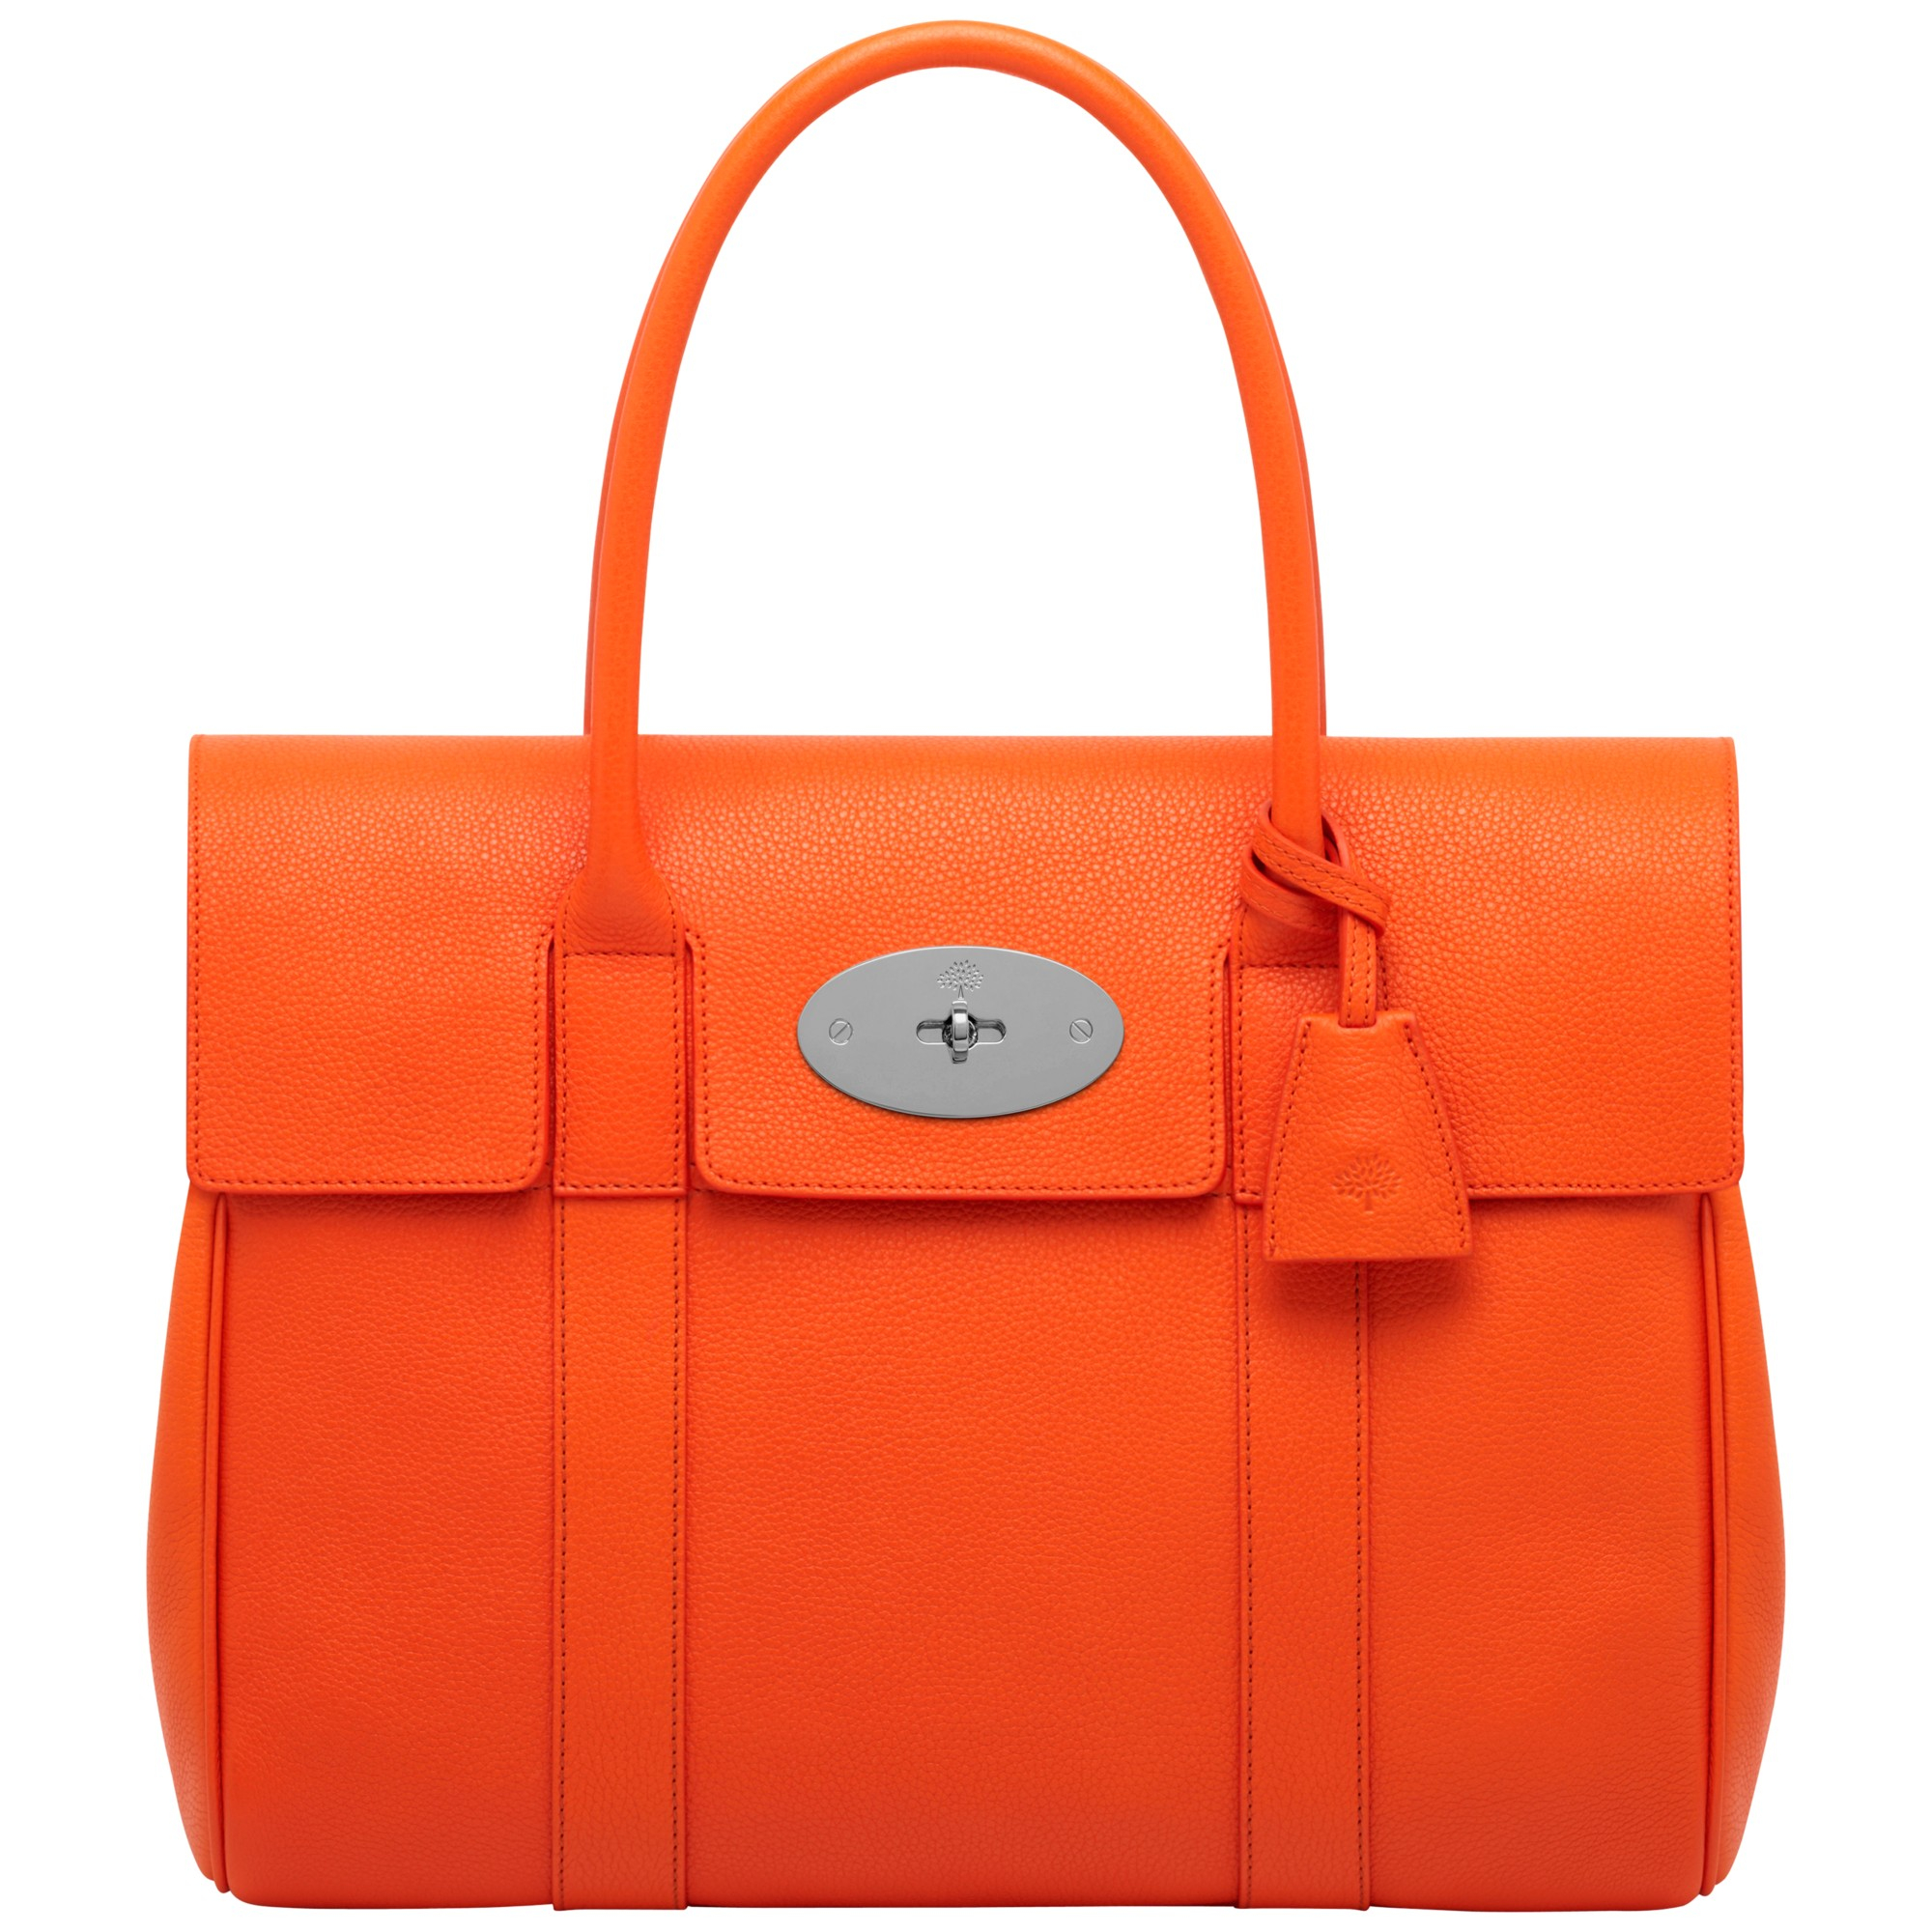 Mulberry Bayswater Small Leather Grab Bag in Orange | Lyst